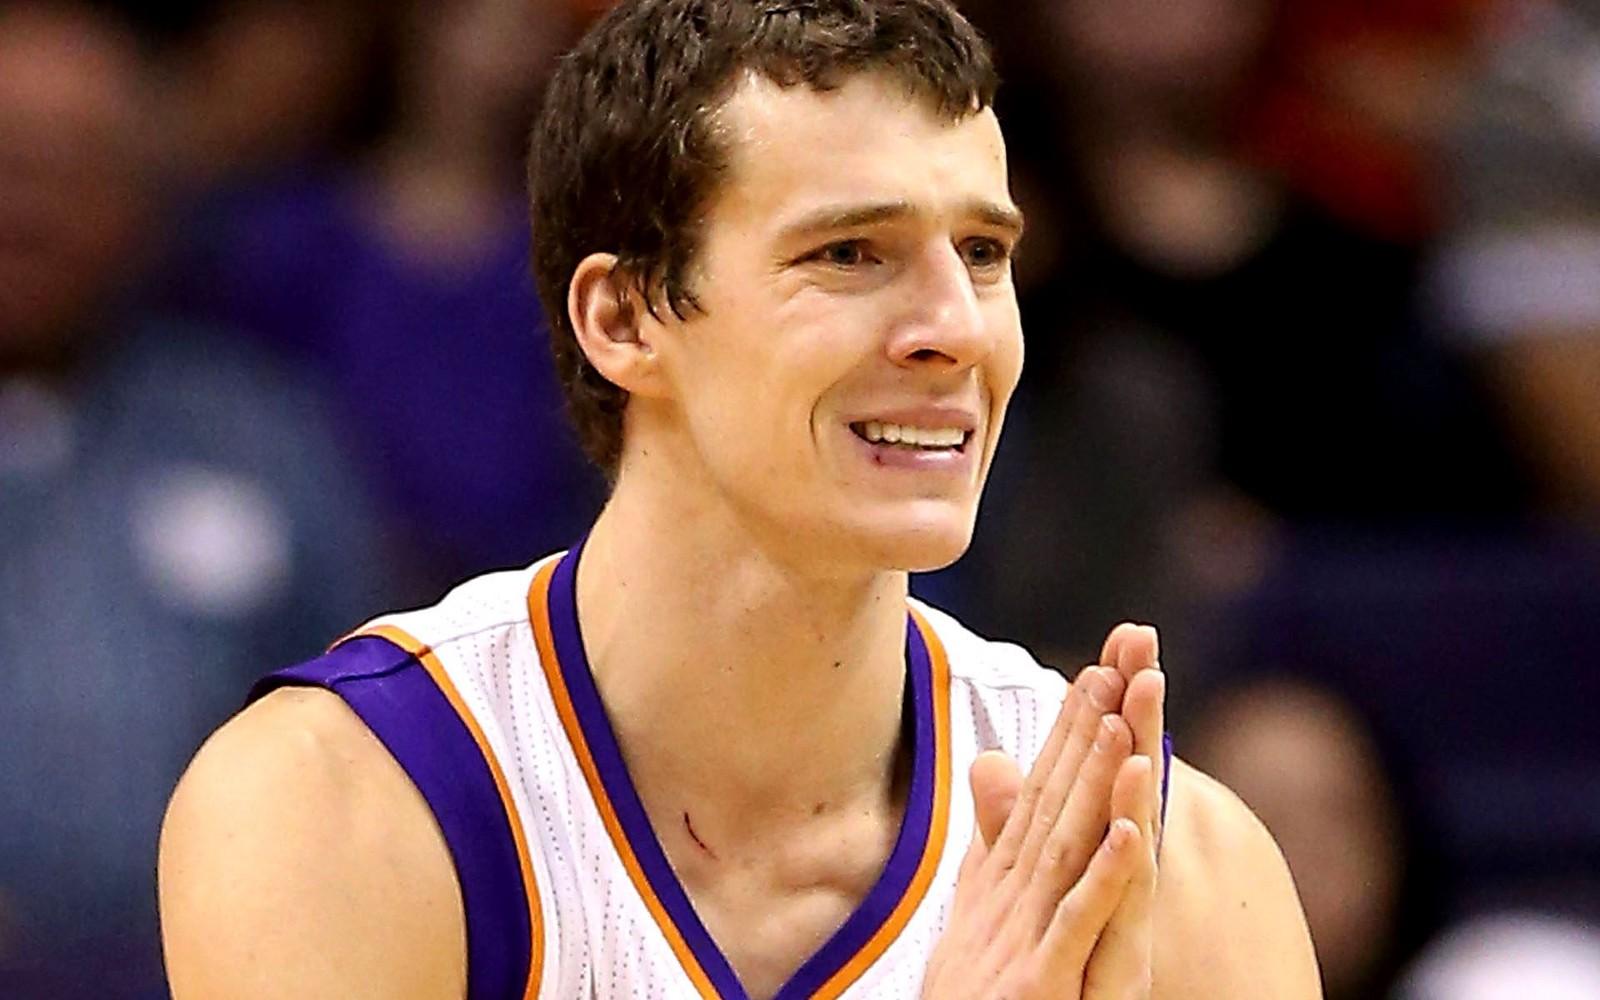 What Goran Dragic Tells Us About Ourselves